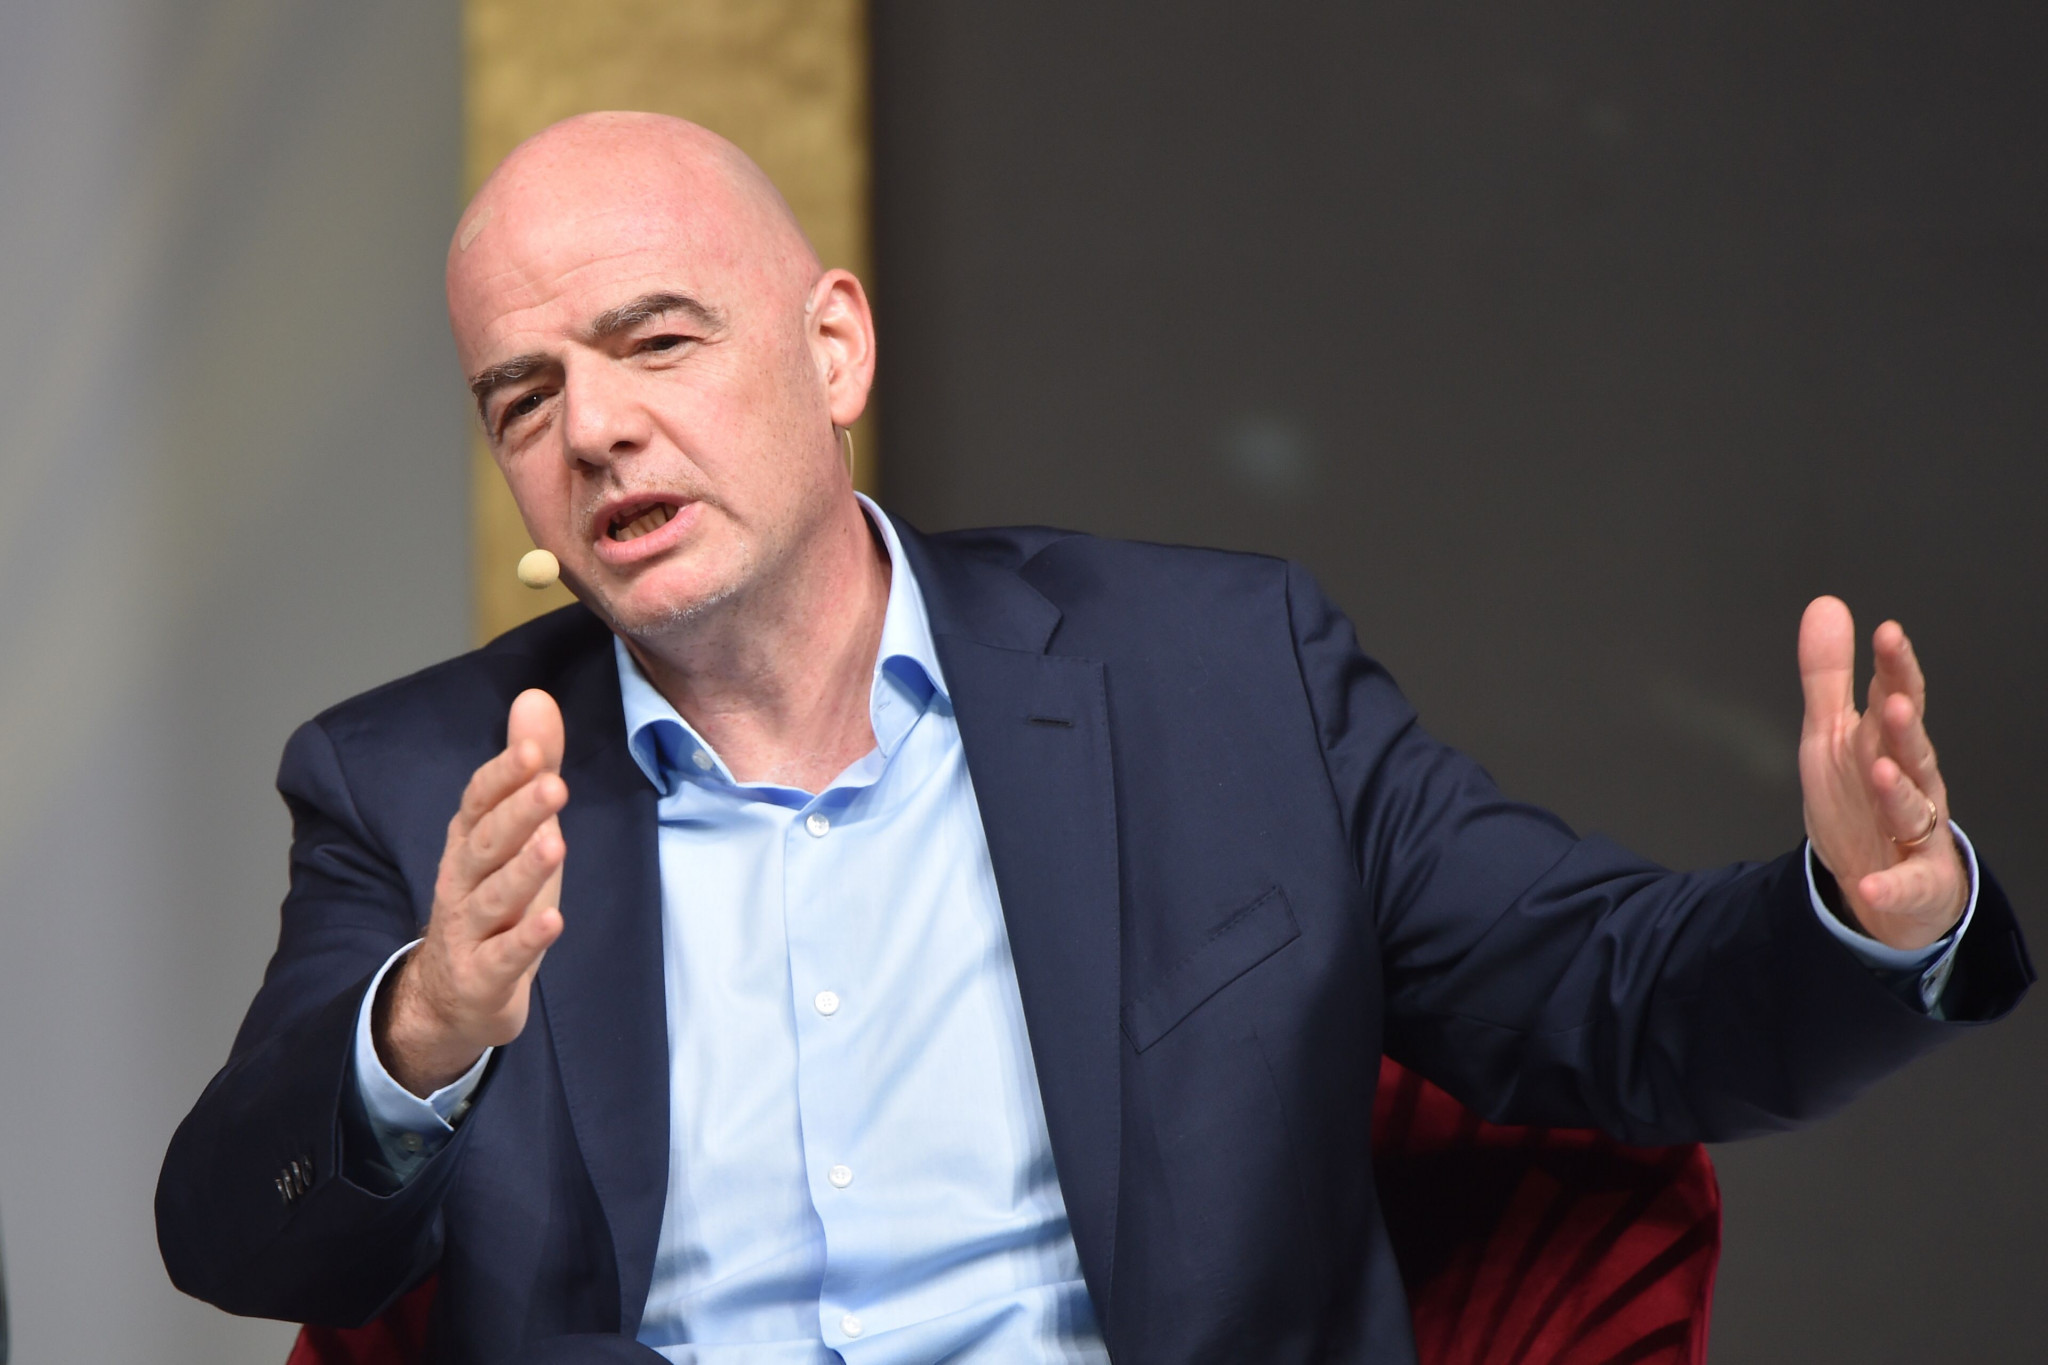 FIFA President Gianni Infantino has claimed the strategy will reduce the difference in standards across the world ©Getty Images